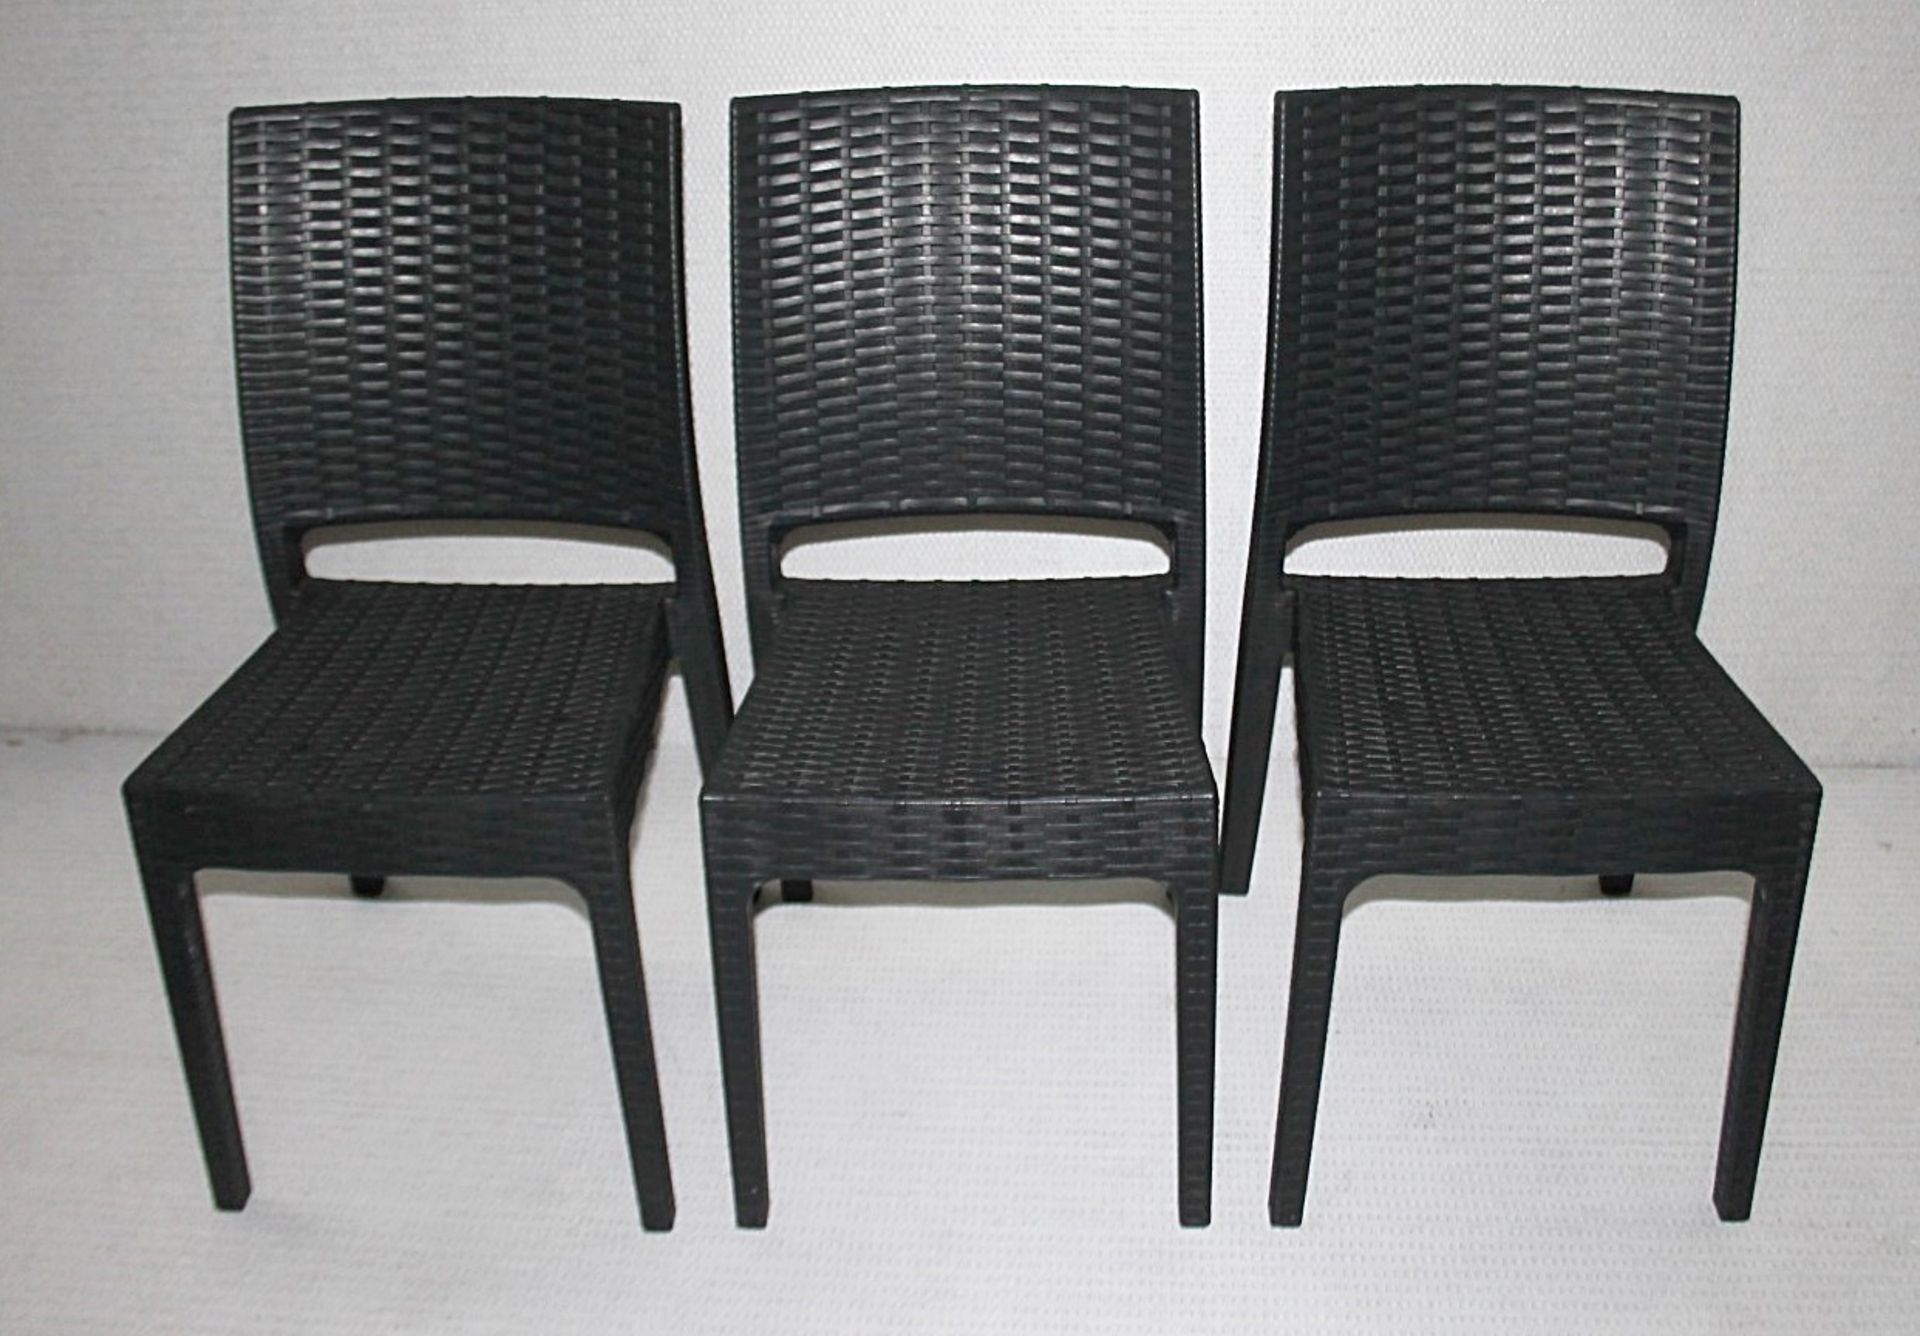 8 x SIESTA EXCLUSIVE 'Florida' Commercial Stackable Rattan-style Chairs In Dark Grey - CL987 - - Image 3 of 13